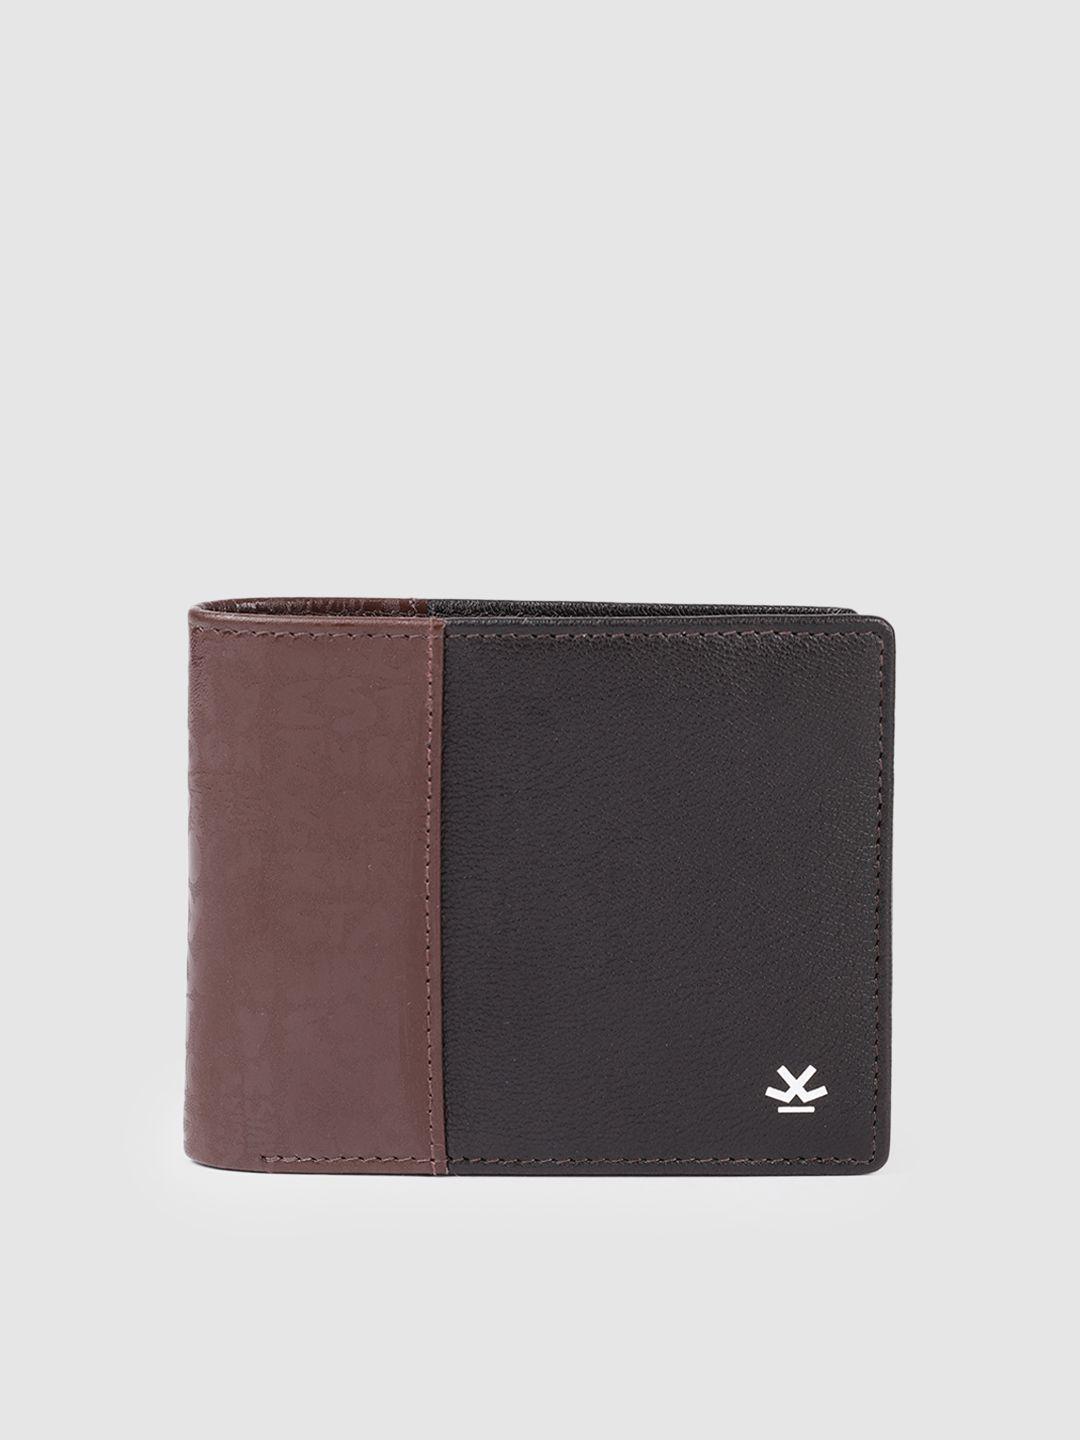 wrogn men brand logo printed leather two fold wallet